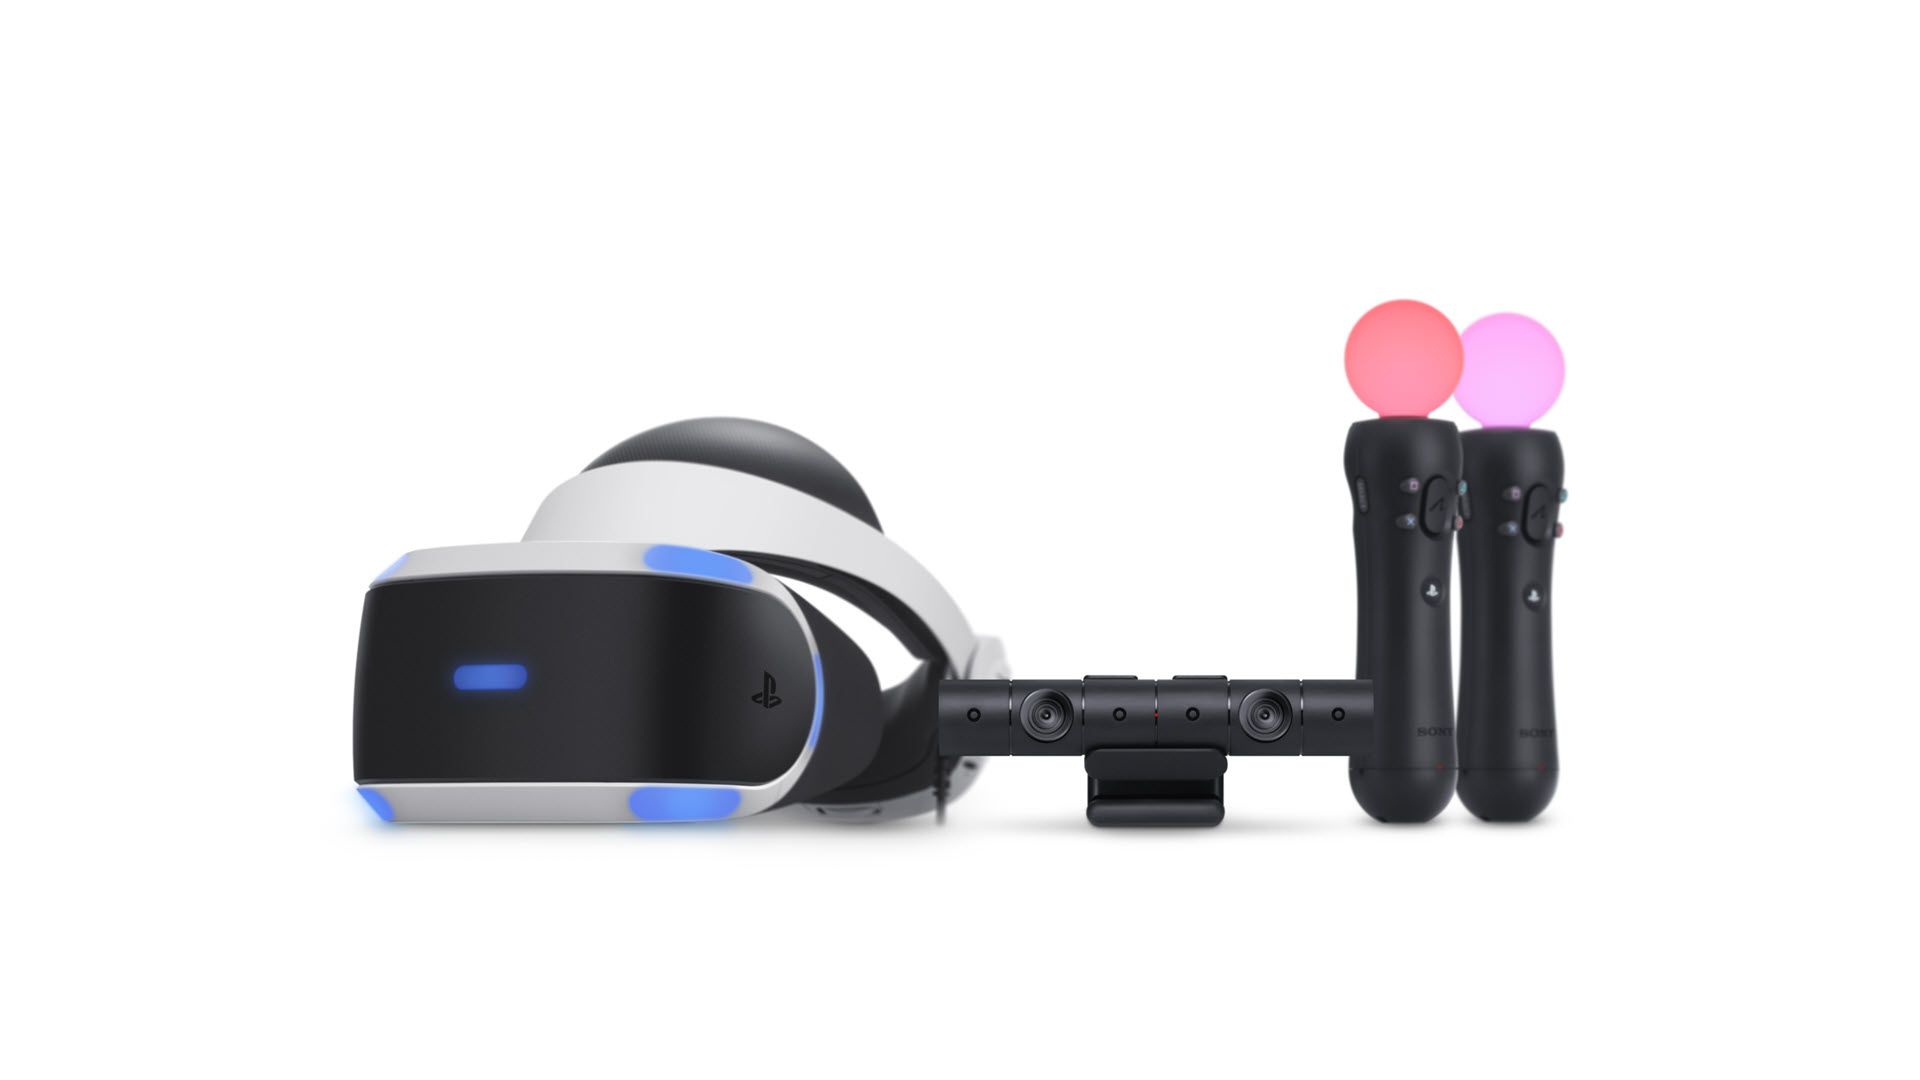 A PlayStation VR headset, a camera, and two wands